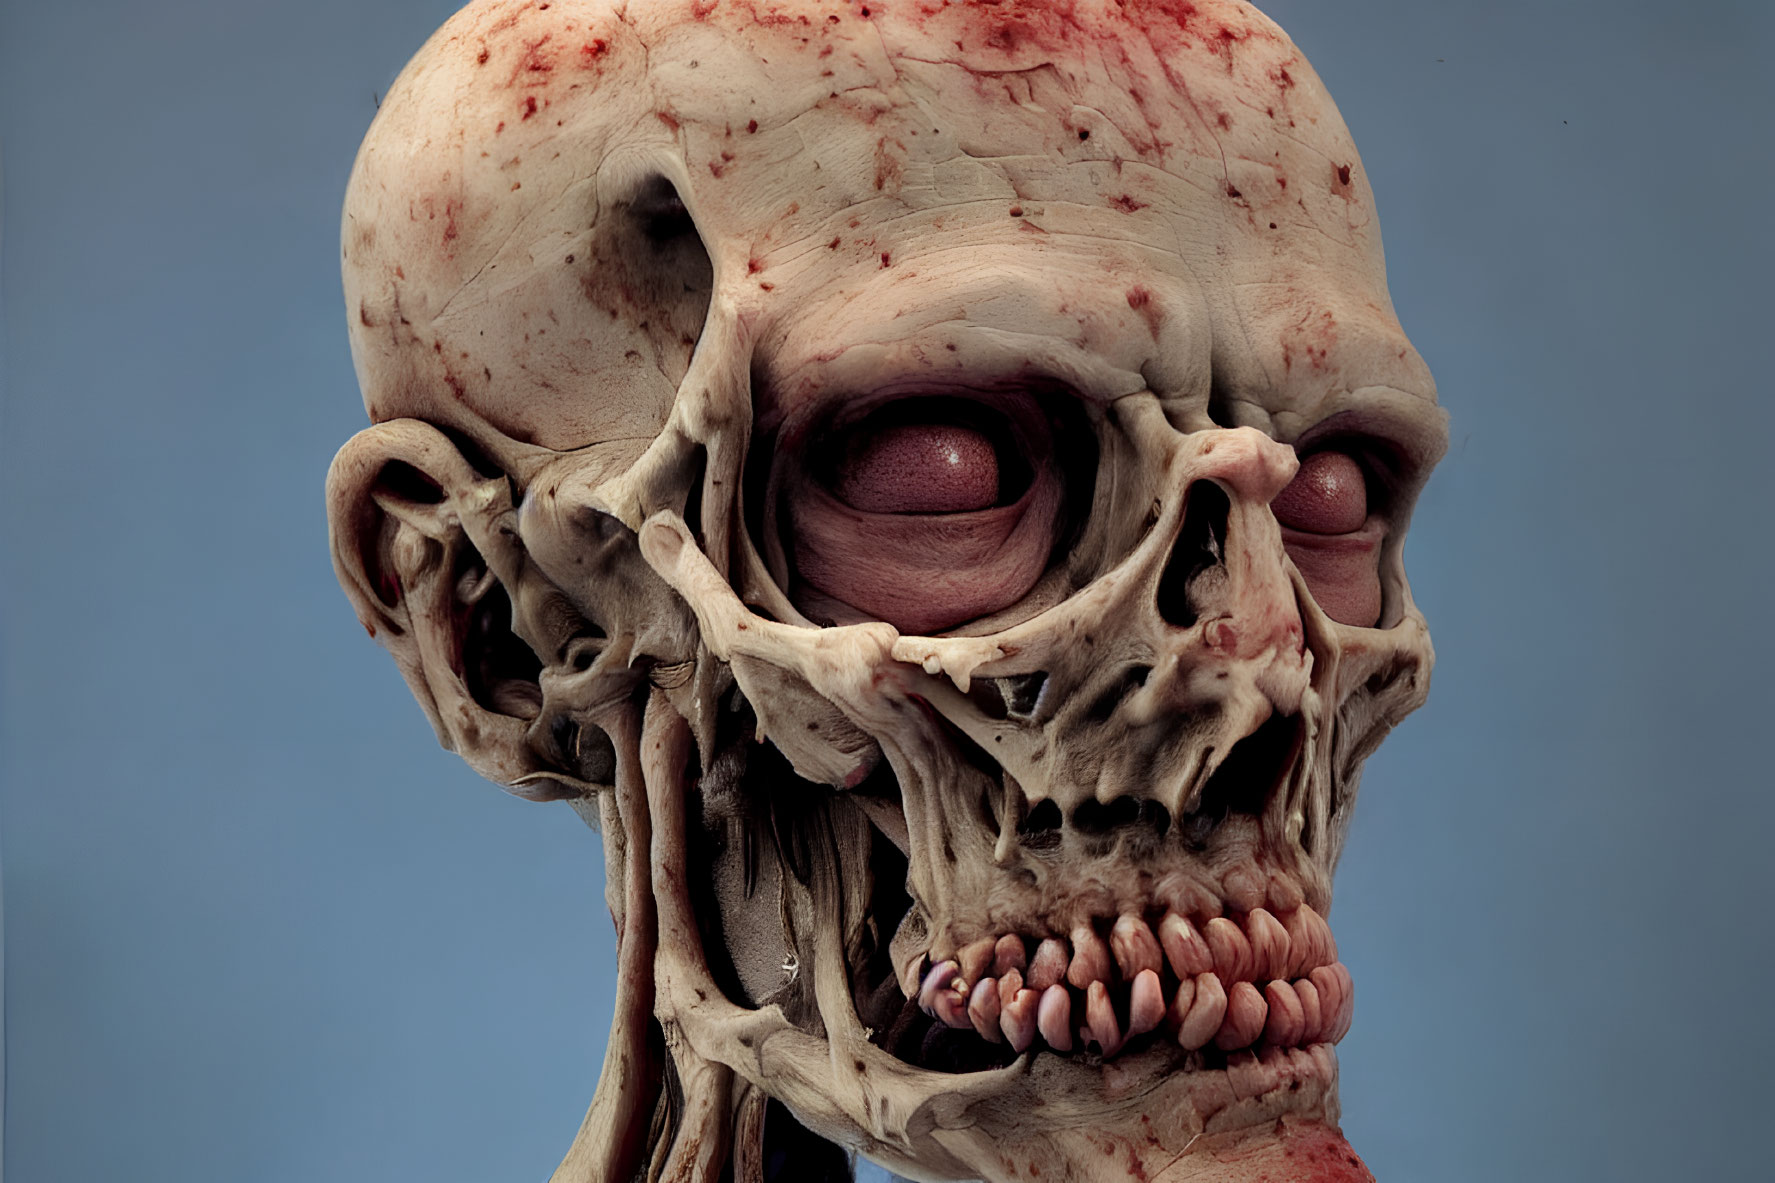 Detailed Gruesome Creature Head Model on Blue Background